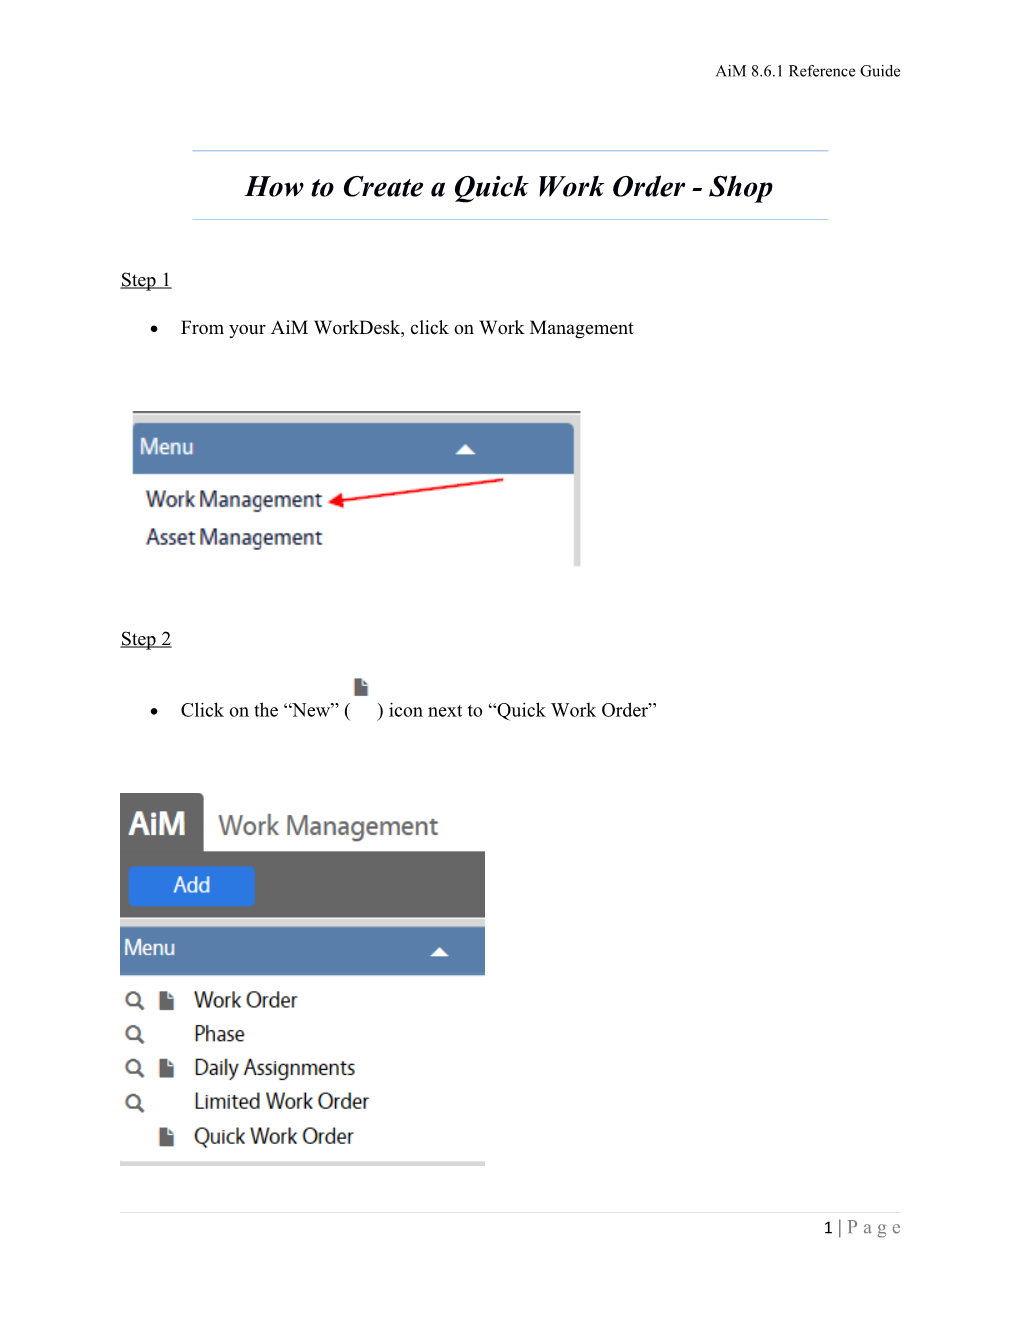 How to Create a Quick Work Order - Shop